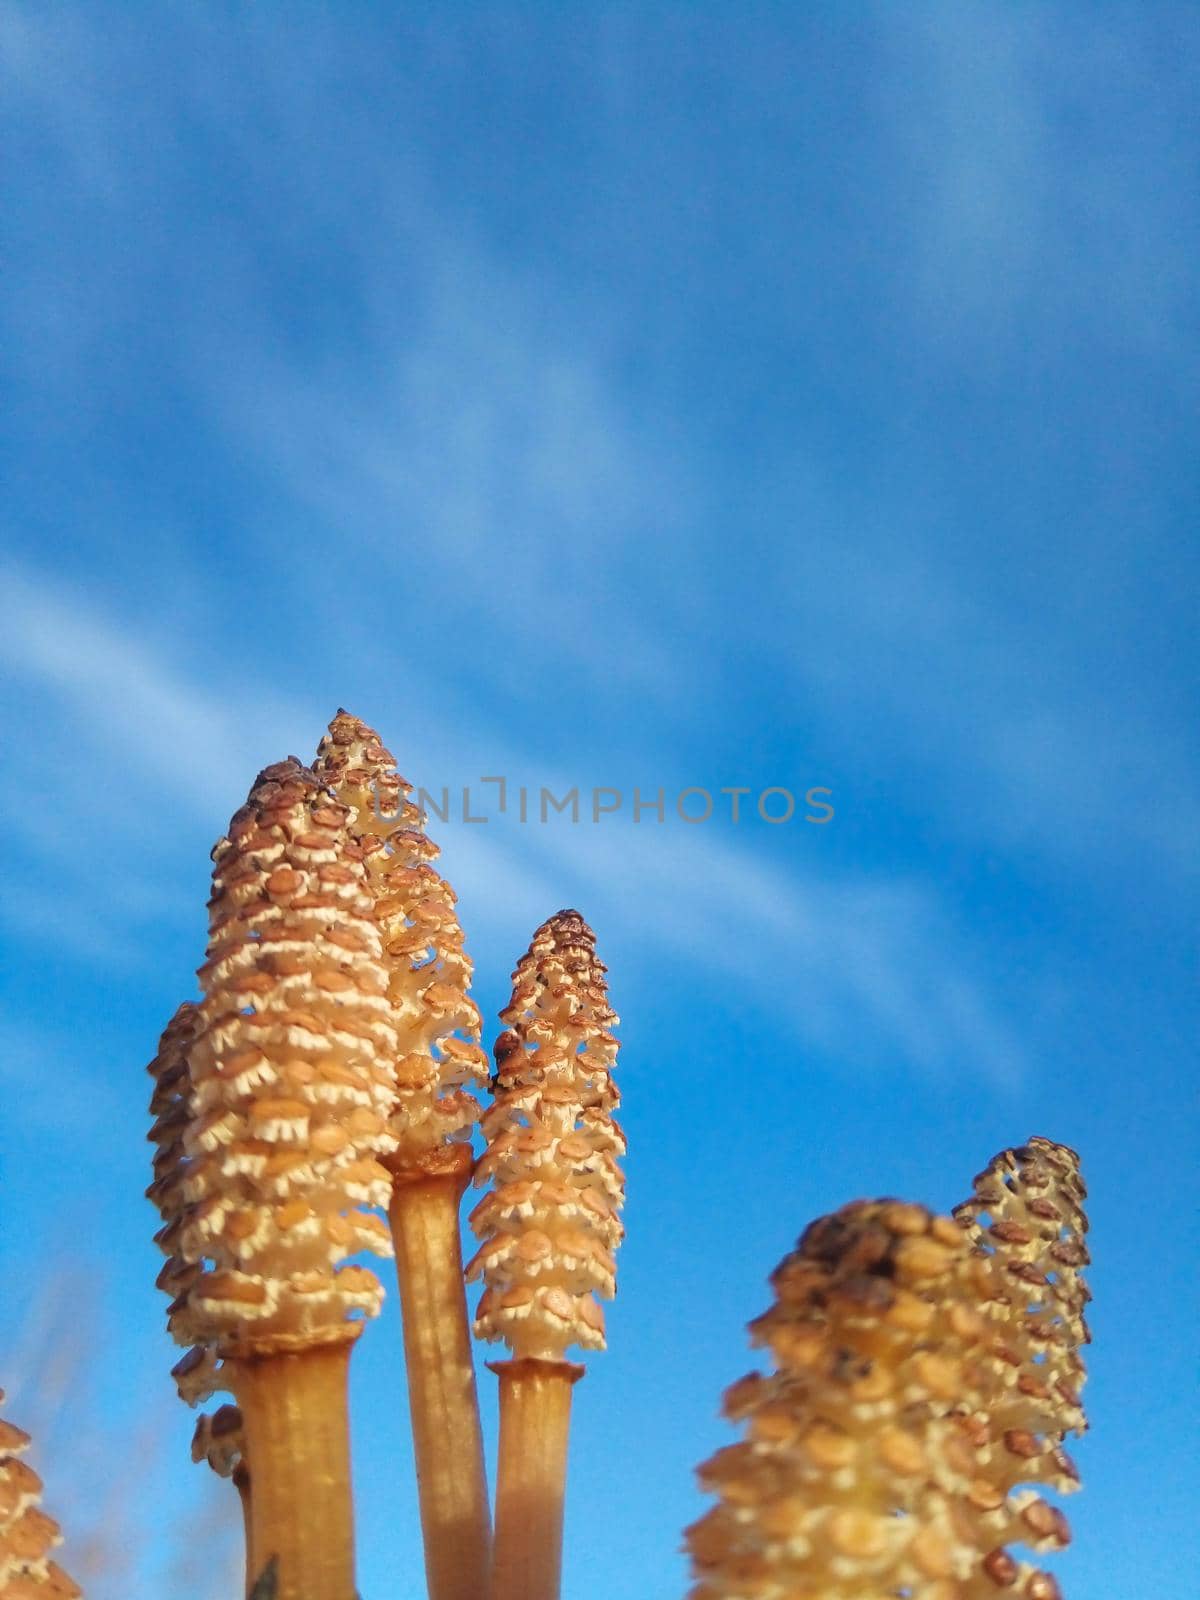 Spore cones of water horsetail emerging from swampy soil against a blue sky background by lapushka62